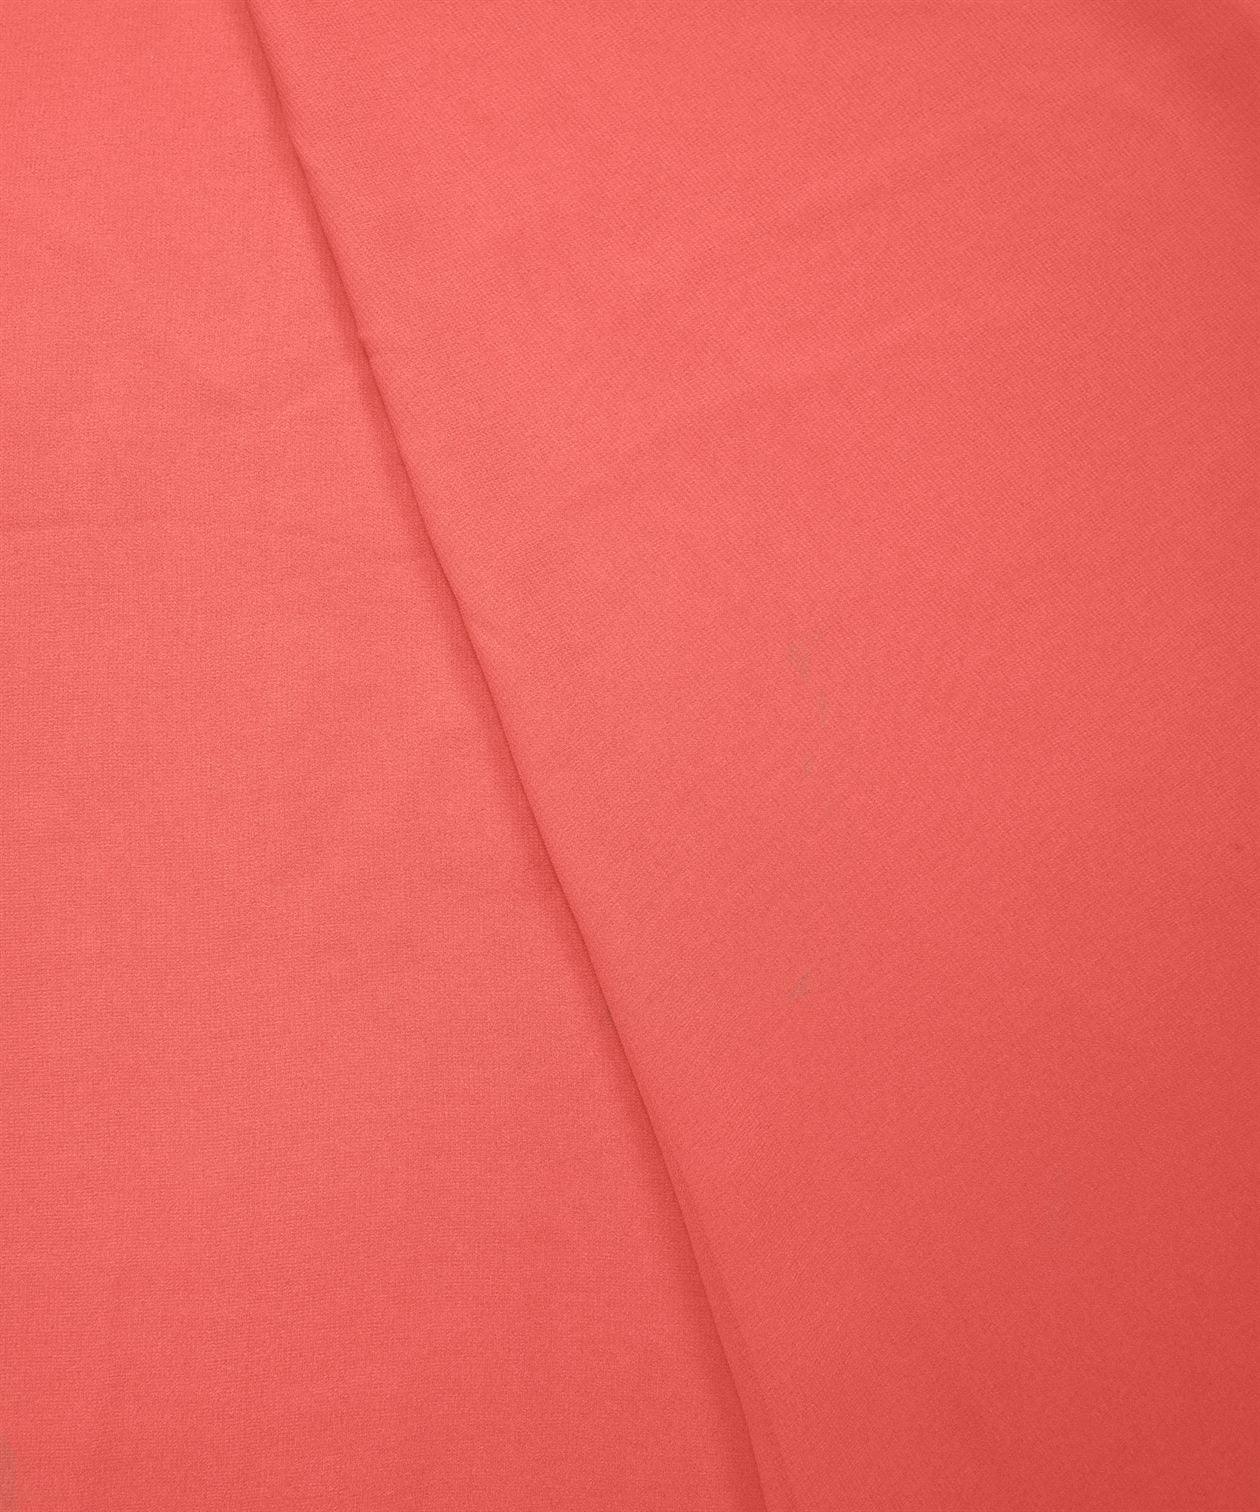 Coral Pink Plain Dyed Georgette (60 Grams) Fabric